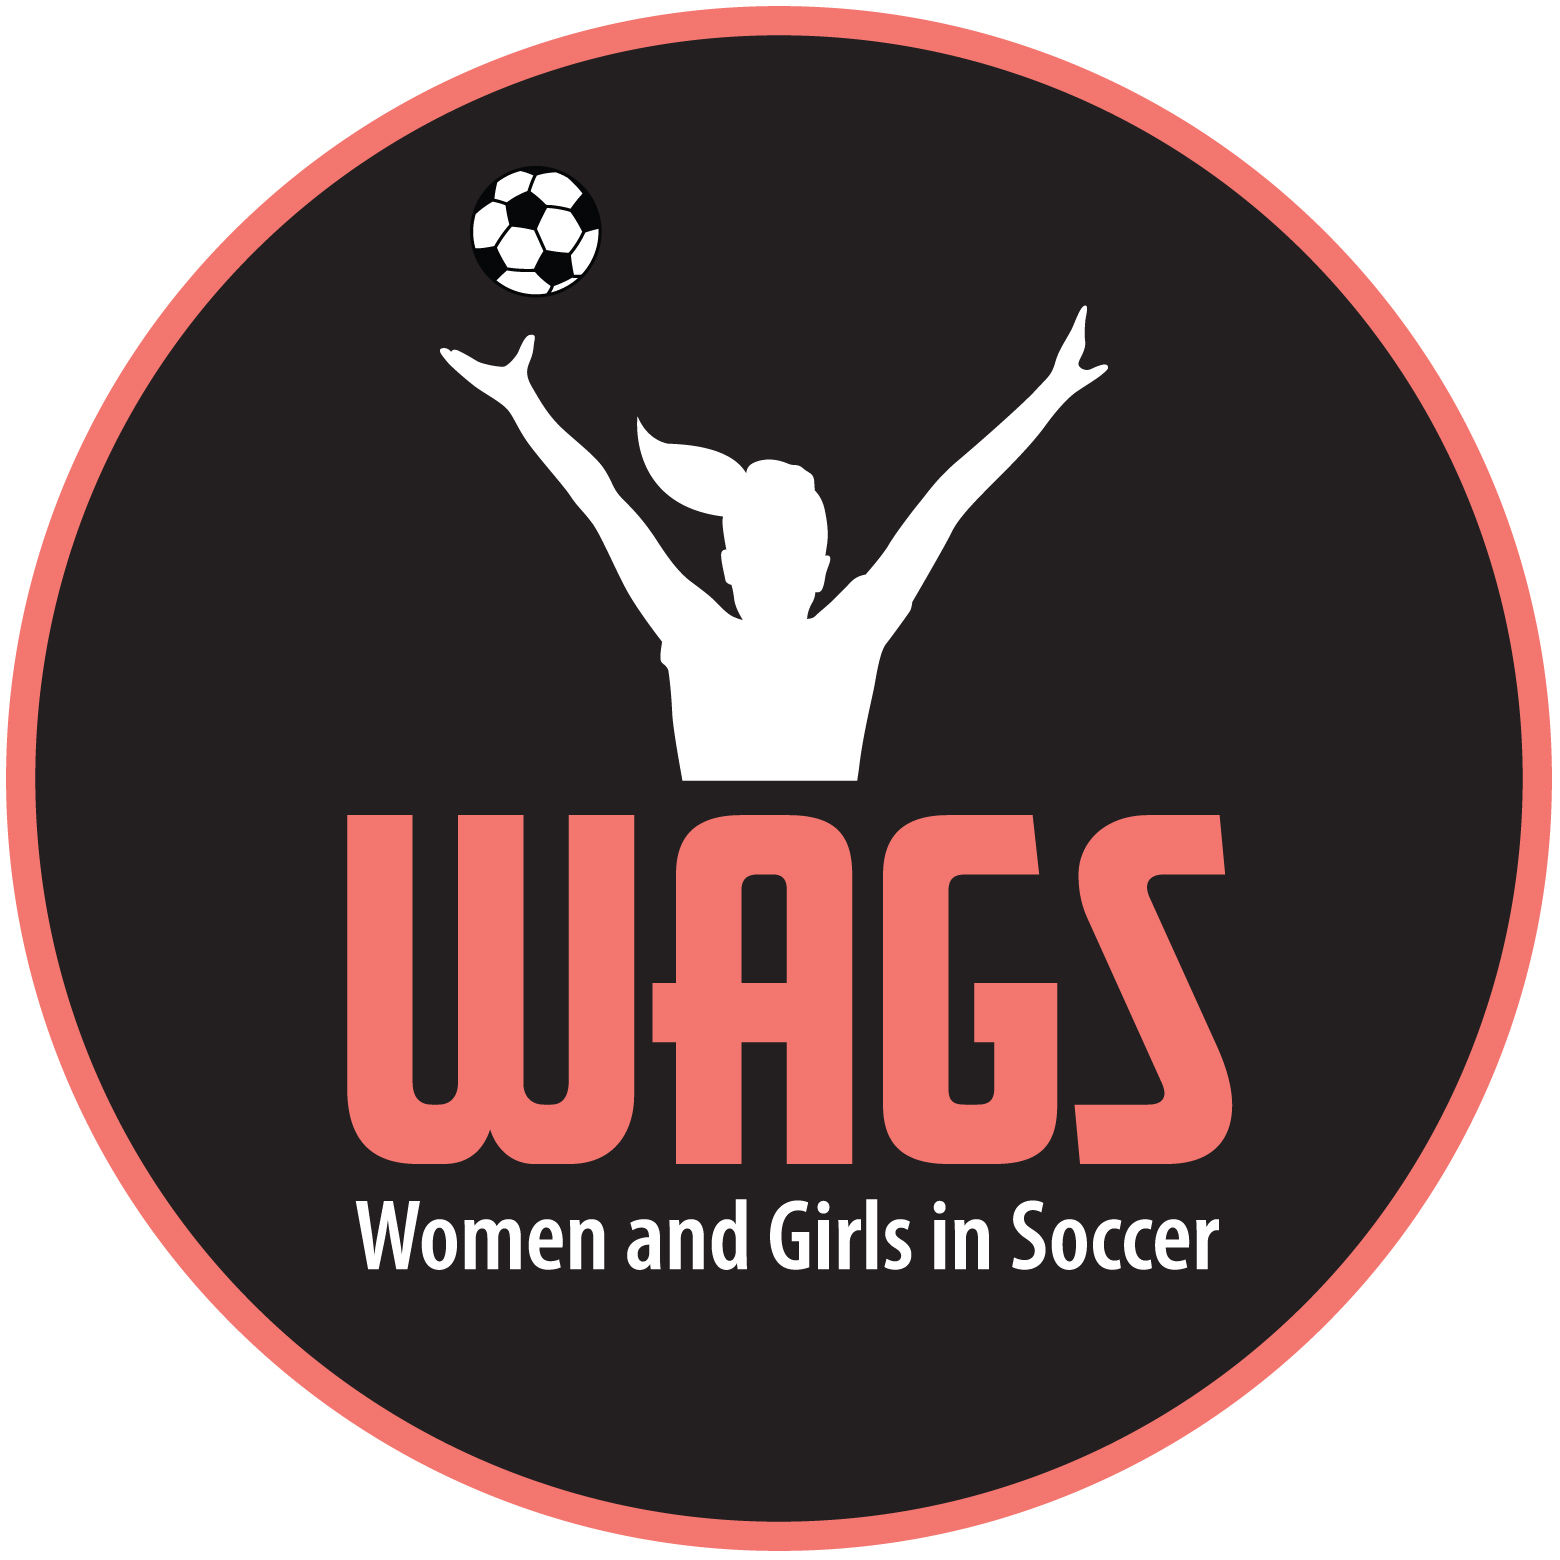 Washington Spirit and Women and Girls in Soccer (WAGS), announce